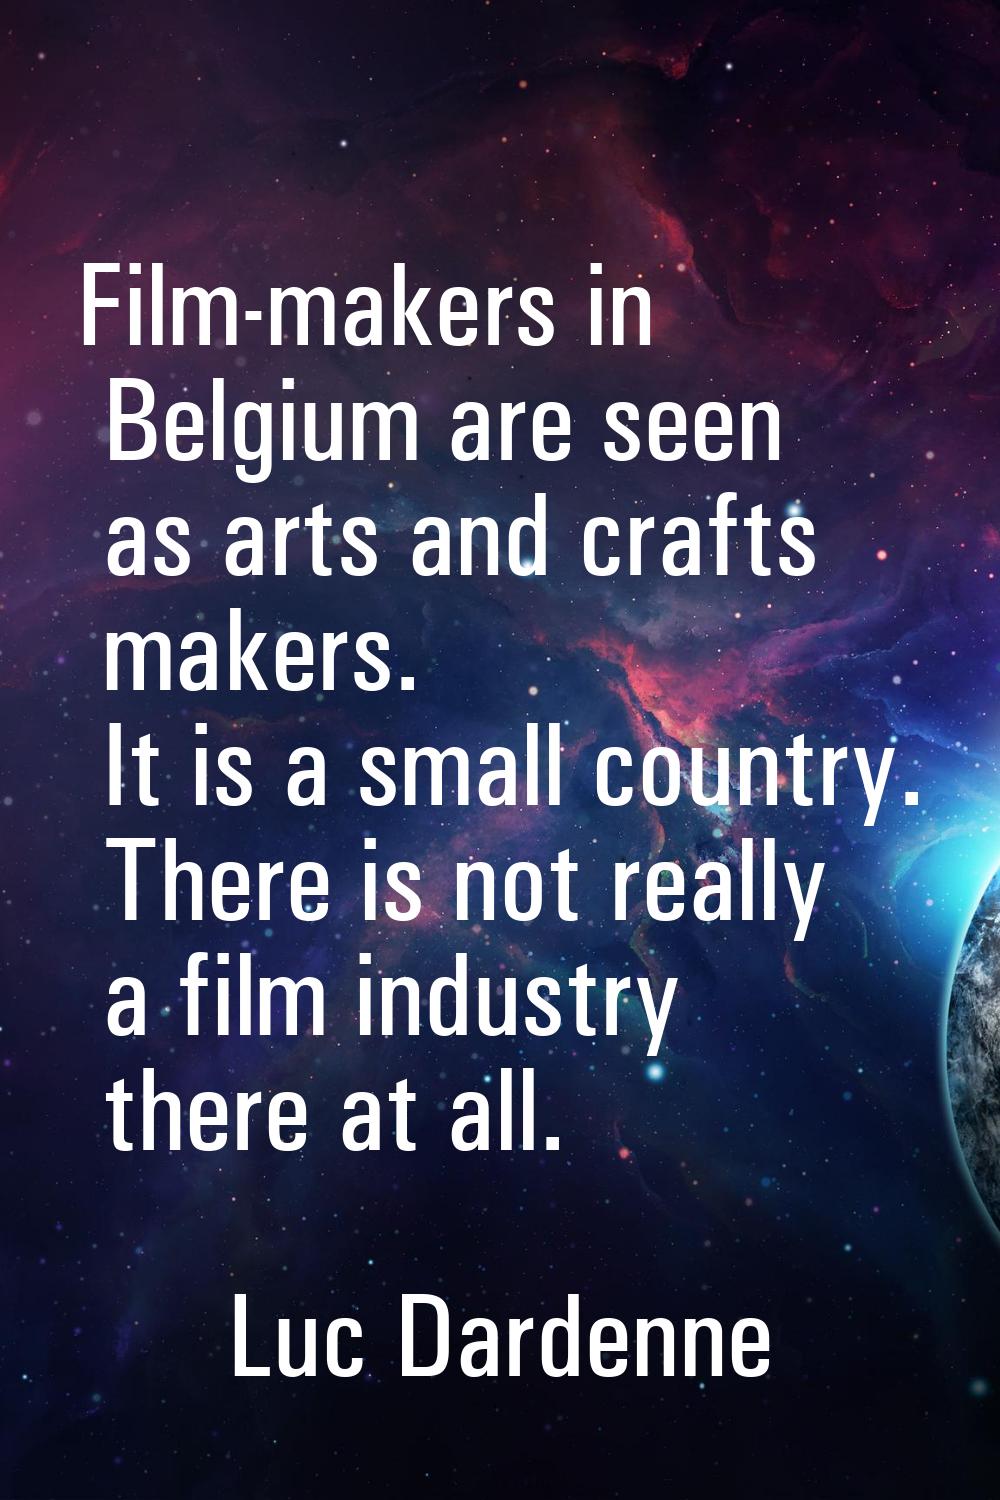 Film-makers in Belgium are seen as arts and crafts makers. It is a small country. There is not real